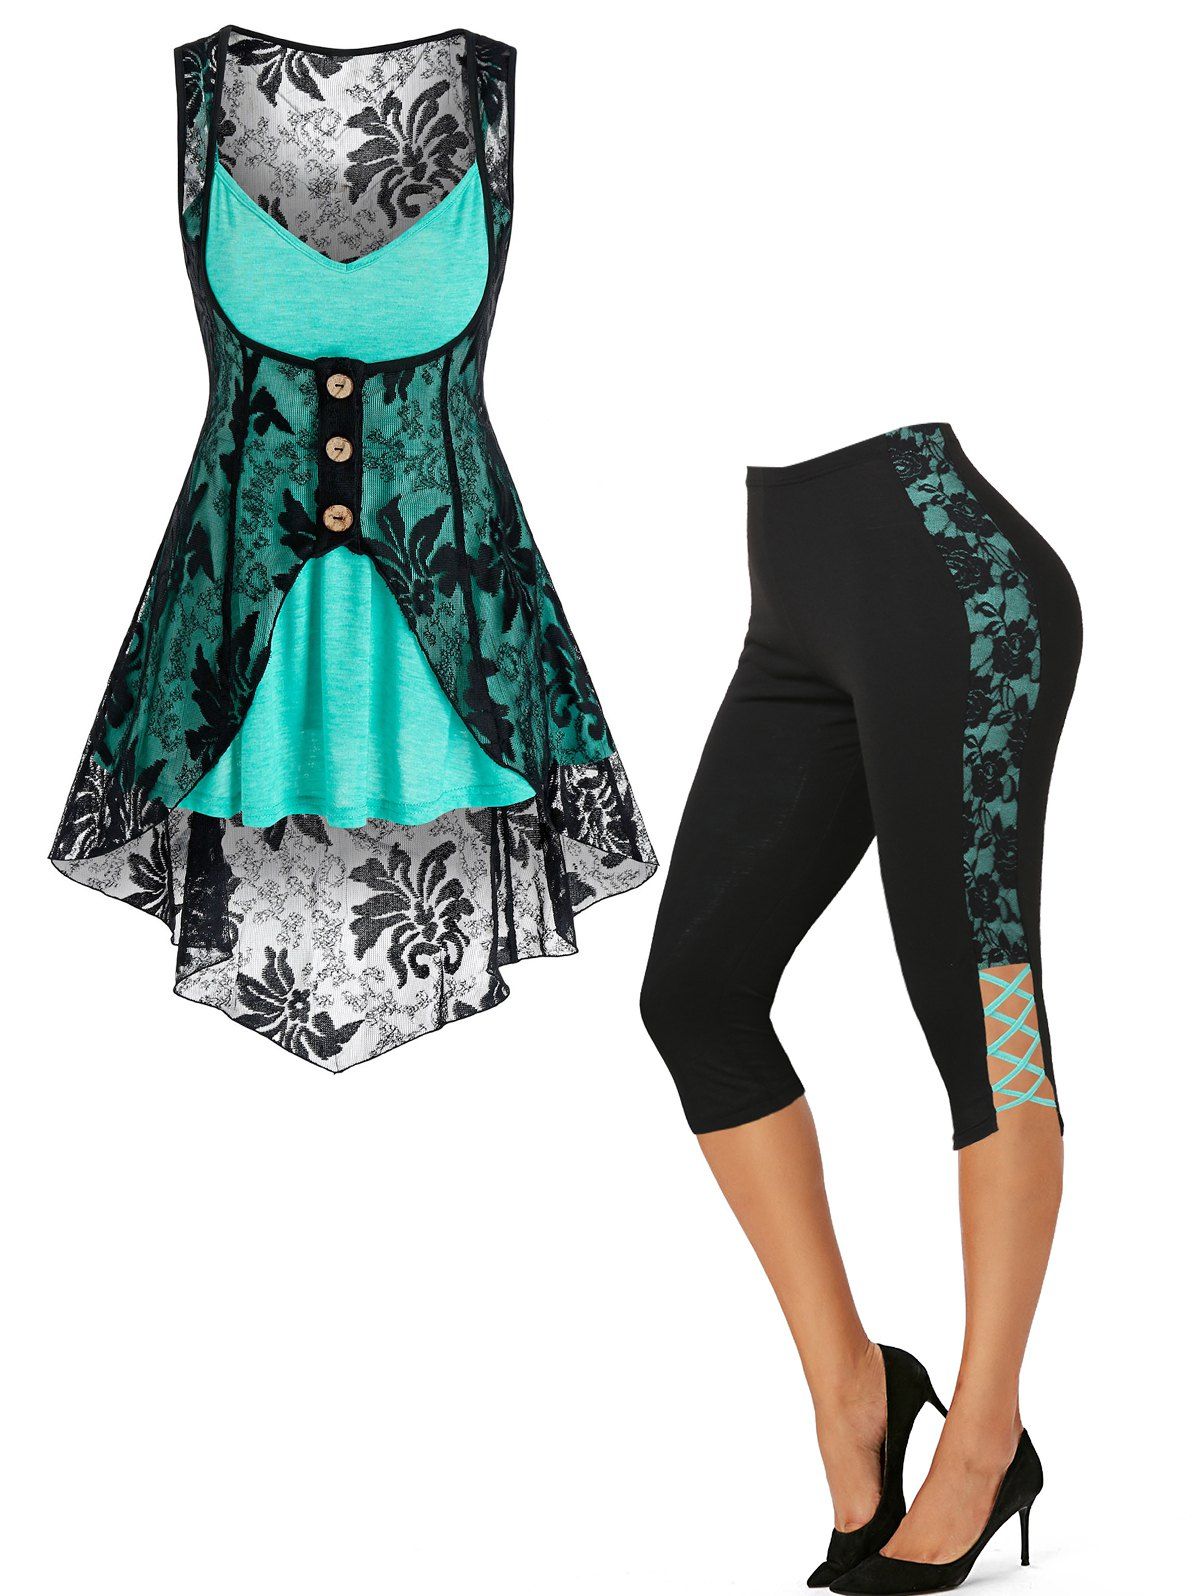 Contrast Flower Lace Vest Heathered Cami Top Set And Lace Up Skinny Capri Leggings Summer Outfit - multicolor S